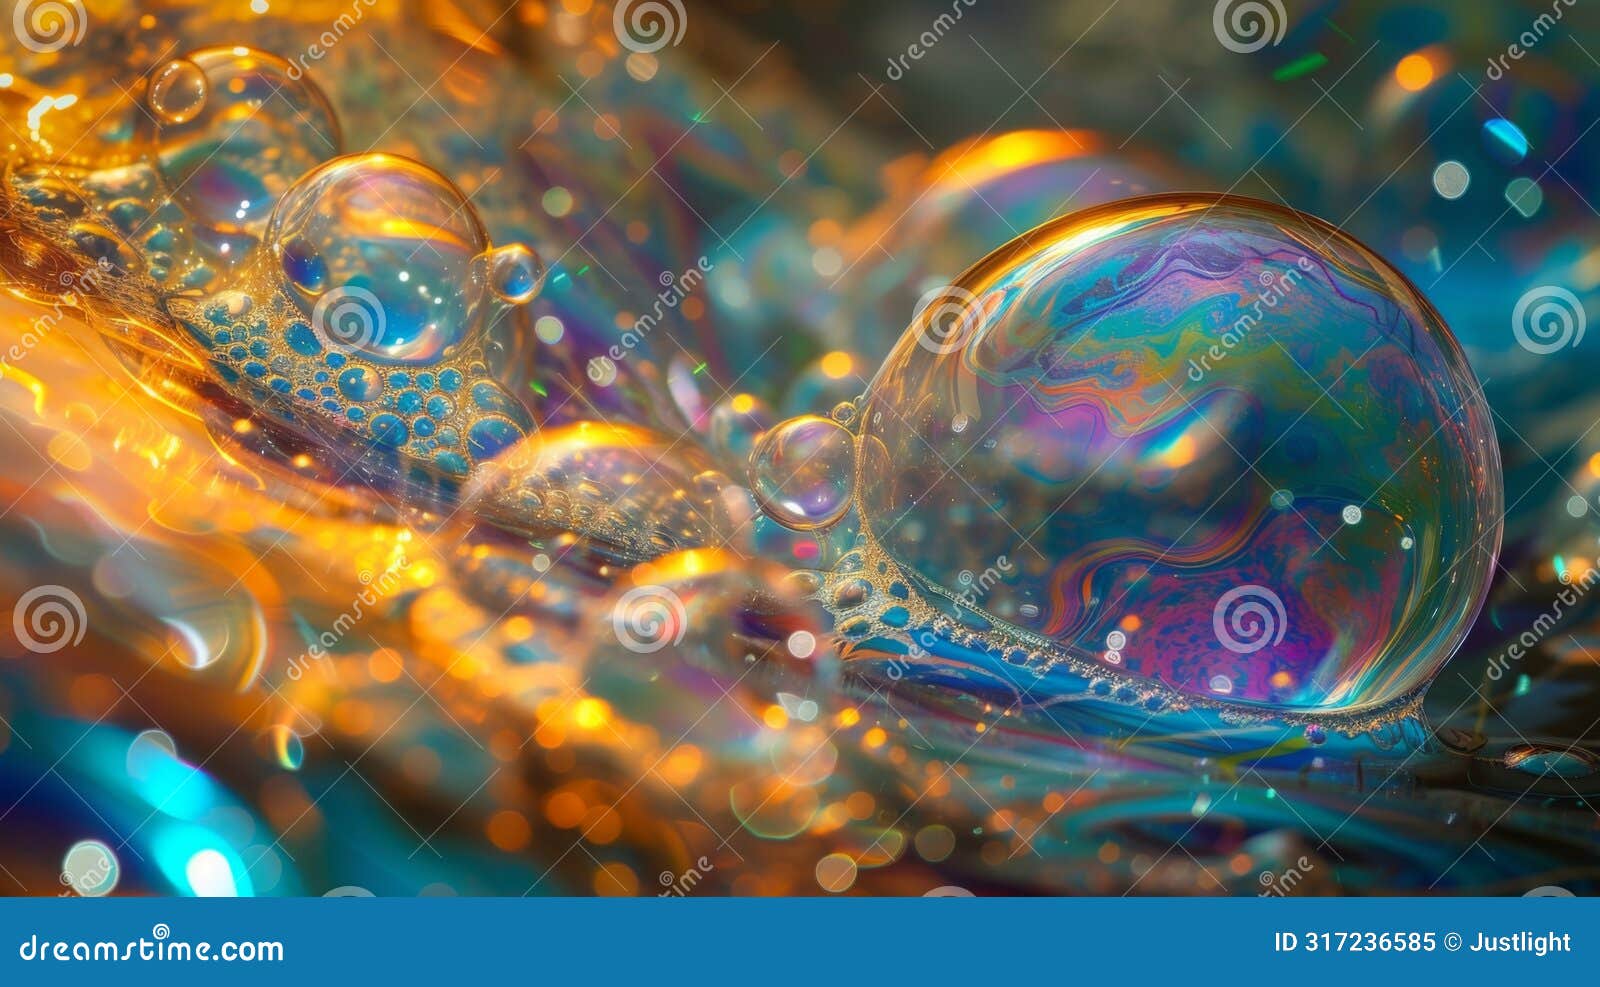 fragile and ephemeral soap bubbles seem to hold a universe inside their glistening walls silently telling a story of